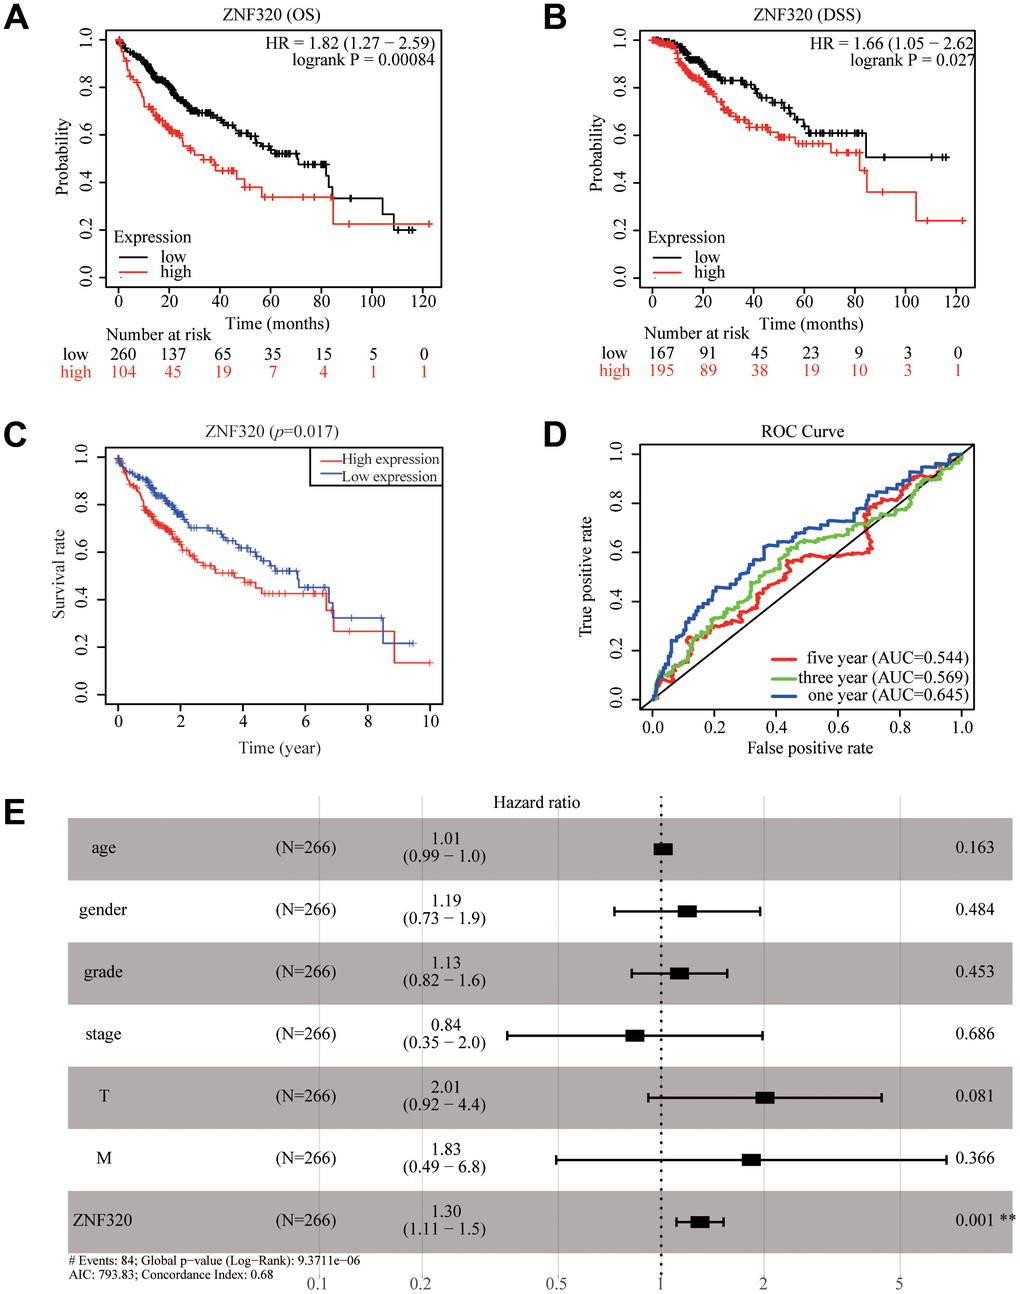 ZNF320 expression in tumor tissues is associated with poor survival in HCC patients. (A, B) HCC patients with lower expression level of ZNF320 had favorable OS and DSS results from KM plotter (p=0.00084; p=0.027). (C) HCC patients with lower expression level of ZNF320 had favorable OS results from R(p=0.017) (D) ROC curves for the 1-, 3-, and 5-year survival according to the expression level of ZNF320. AUC, area under the curve; ROC, receiver operating characteristic. (E) A forest plot of the results of the multivariate analysis. *, P